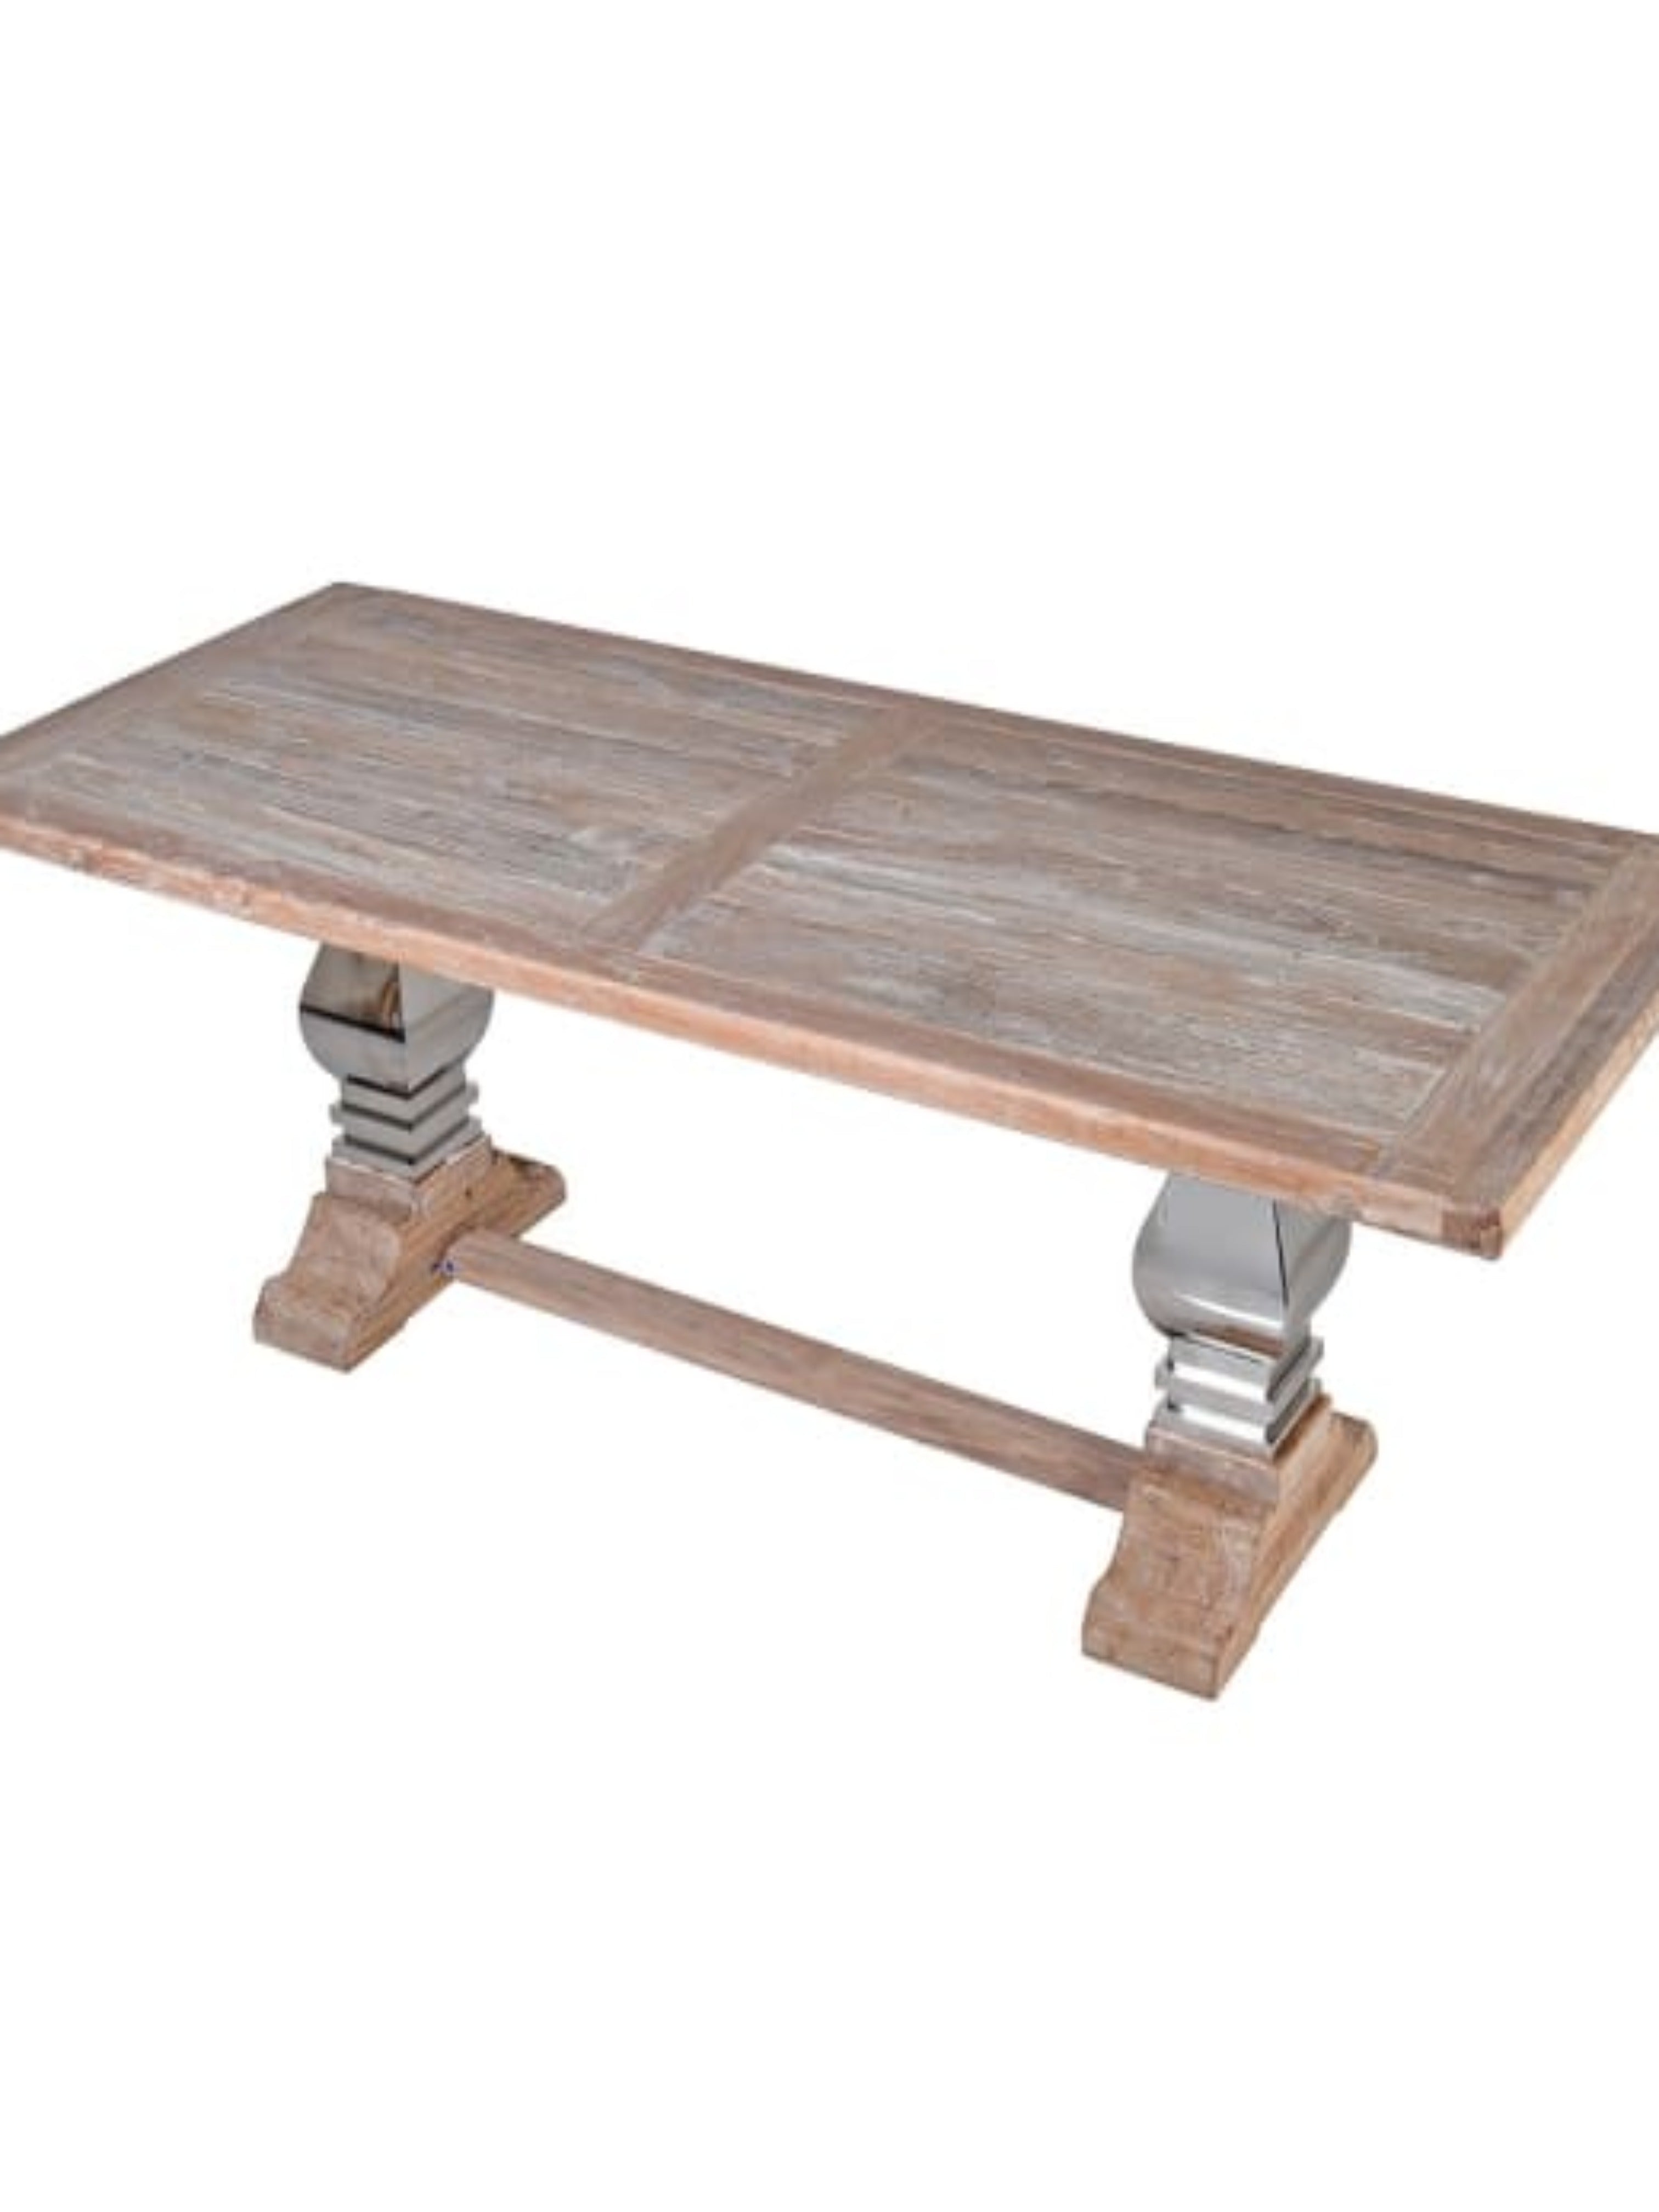 Steel and Wood Refectory Dining Table